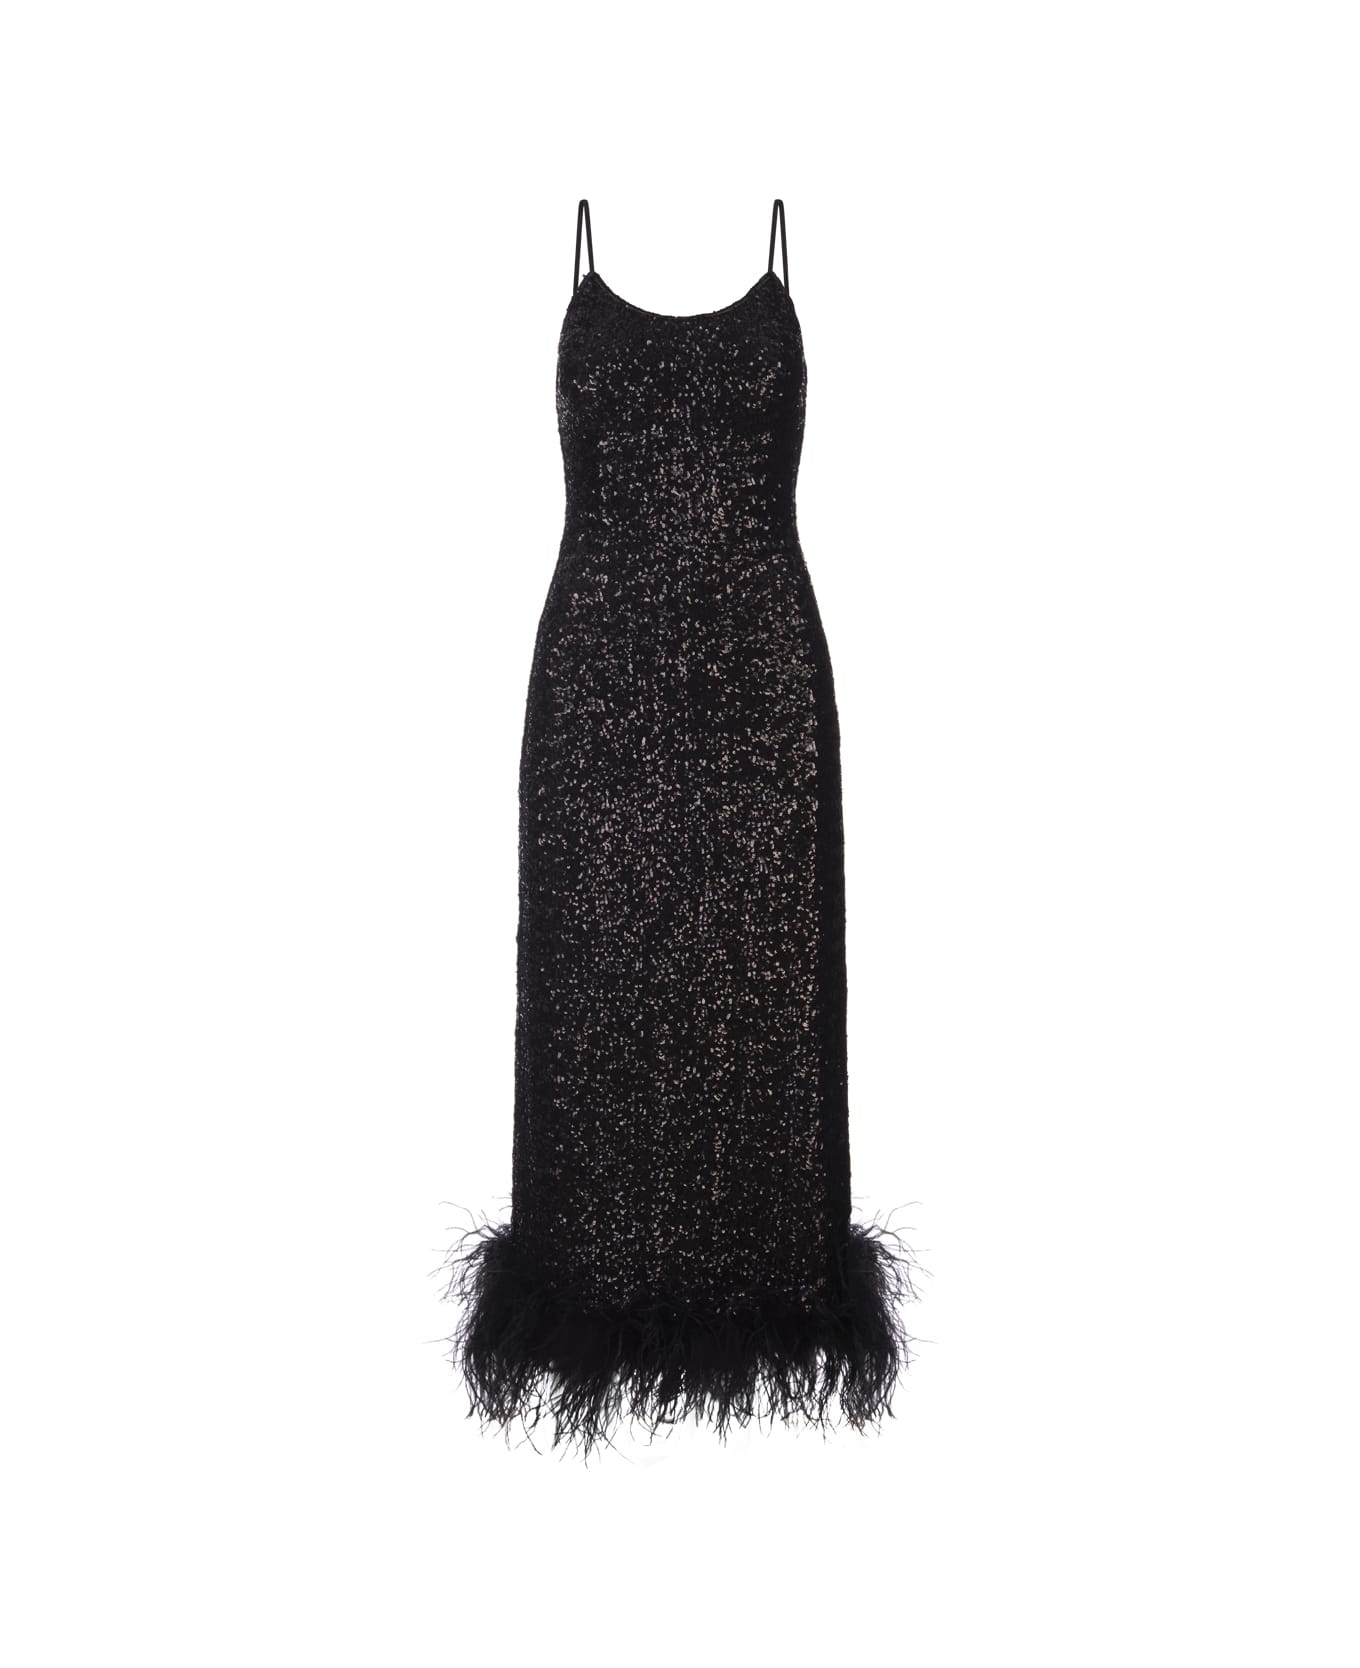 Oseree Black Sequined Petticoat Dress With Feathers - Black